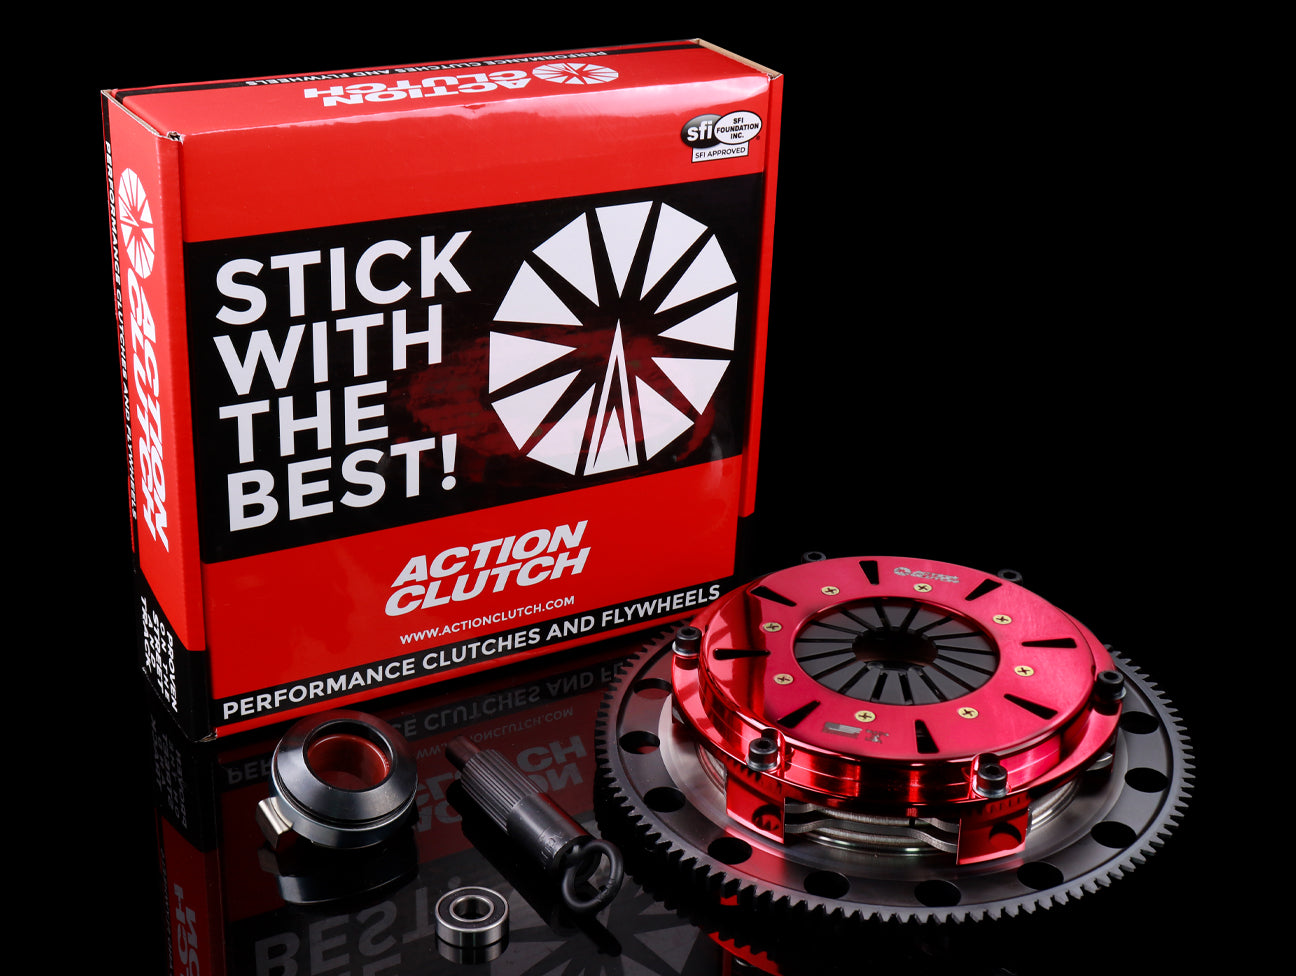 Action Clutch Twin Disc - B-series